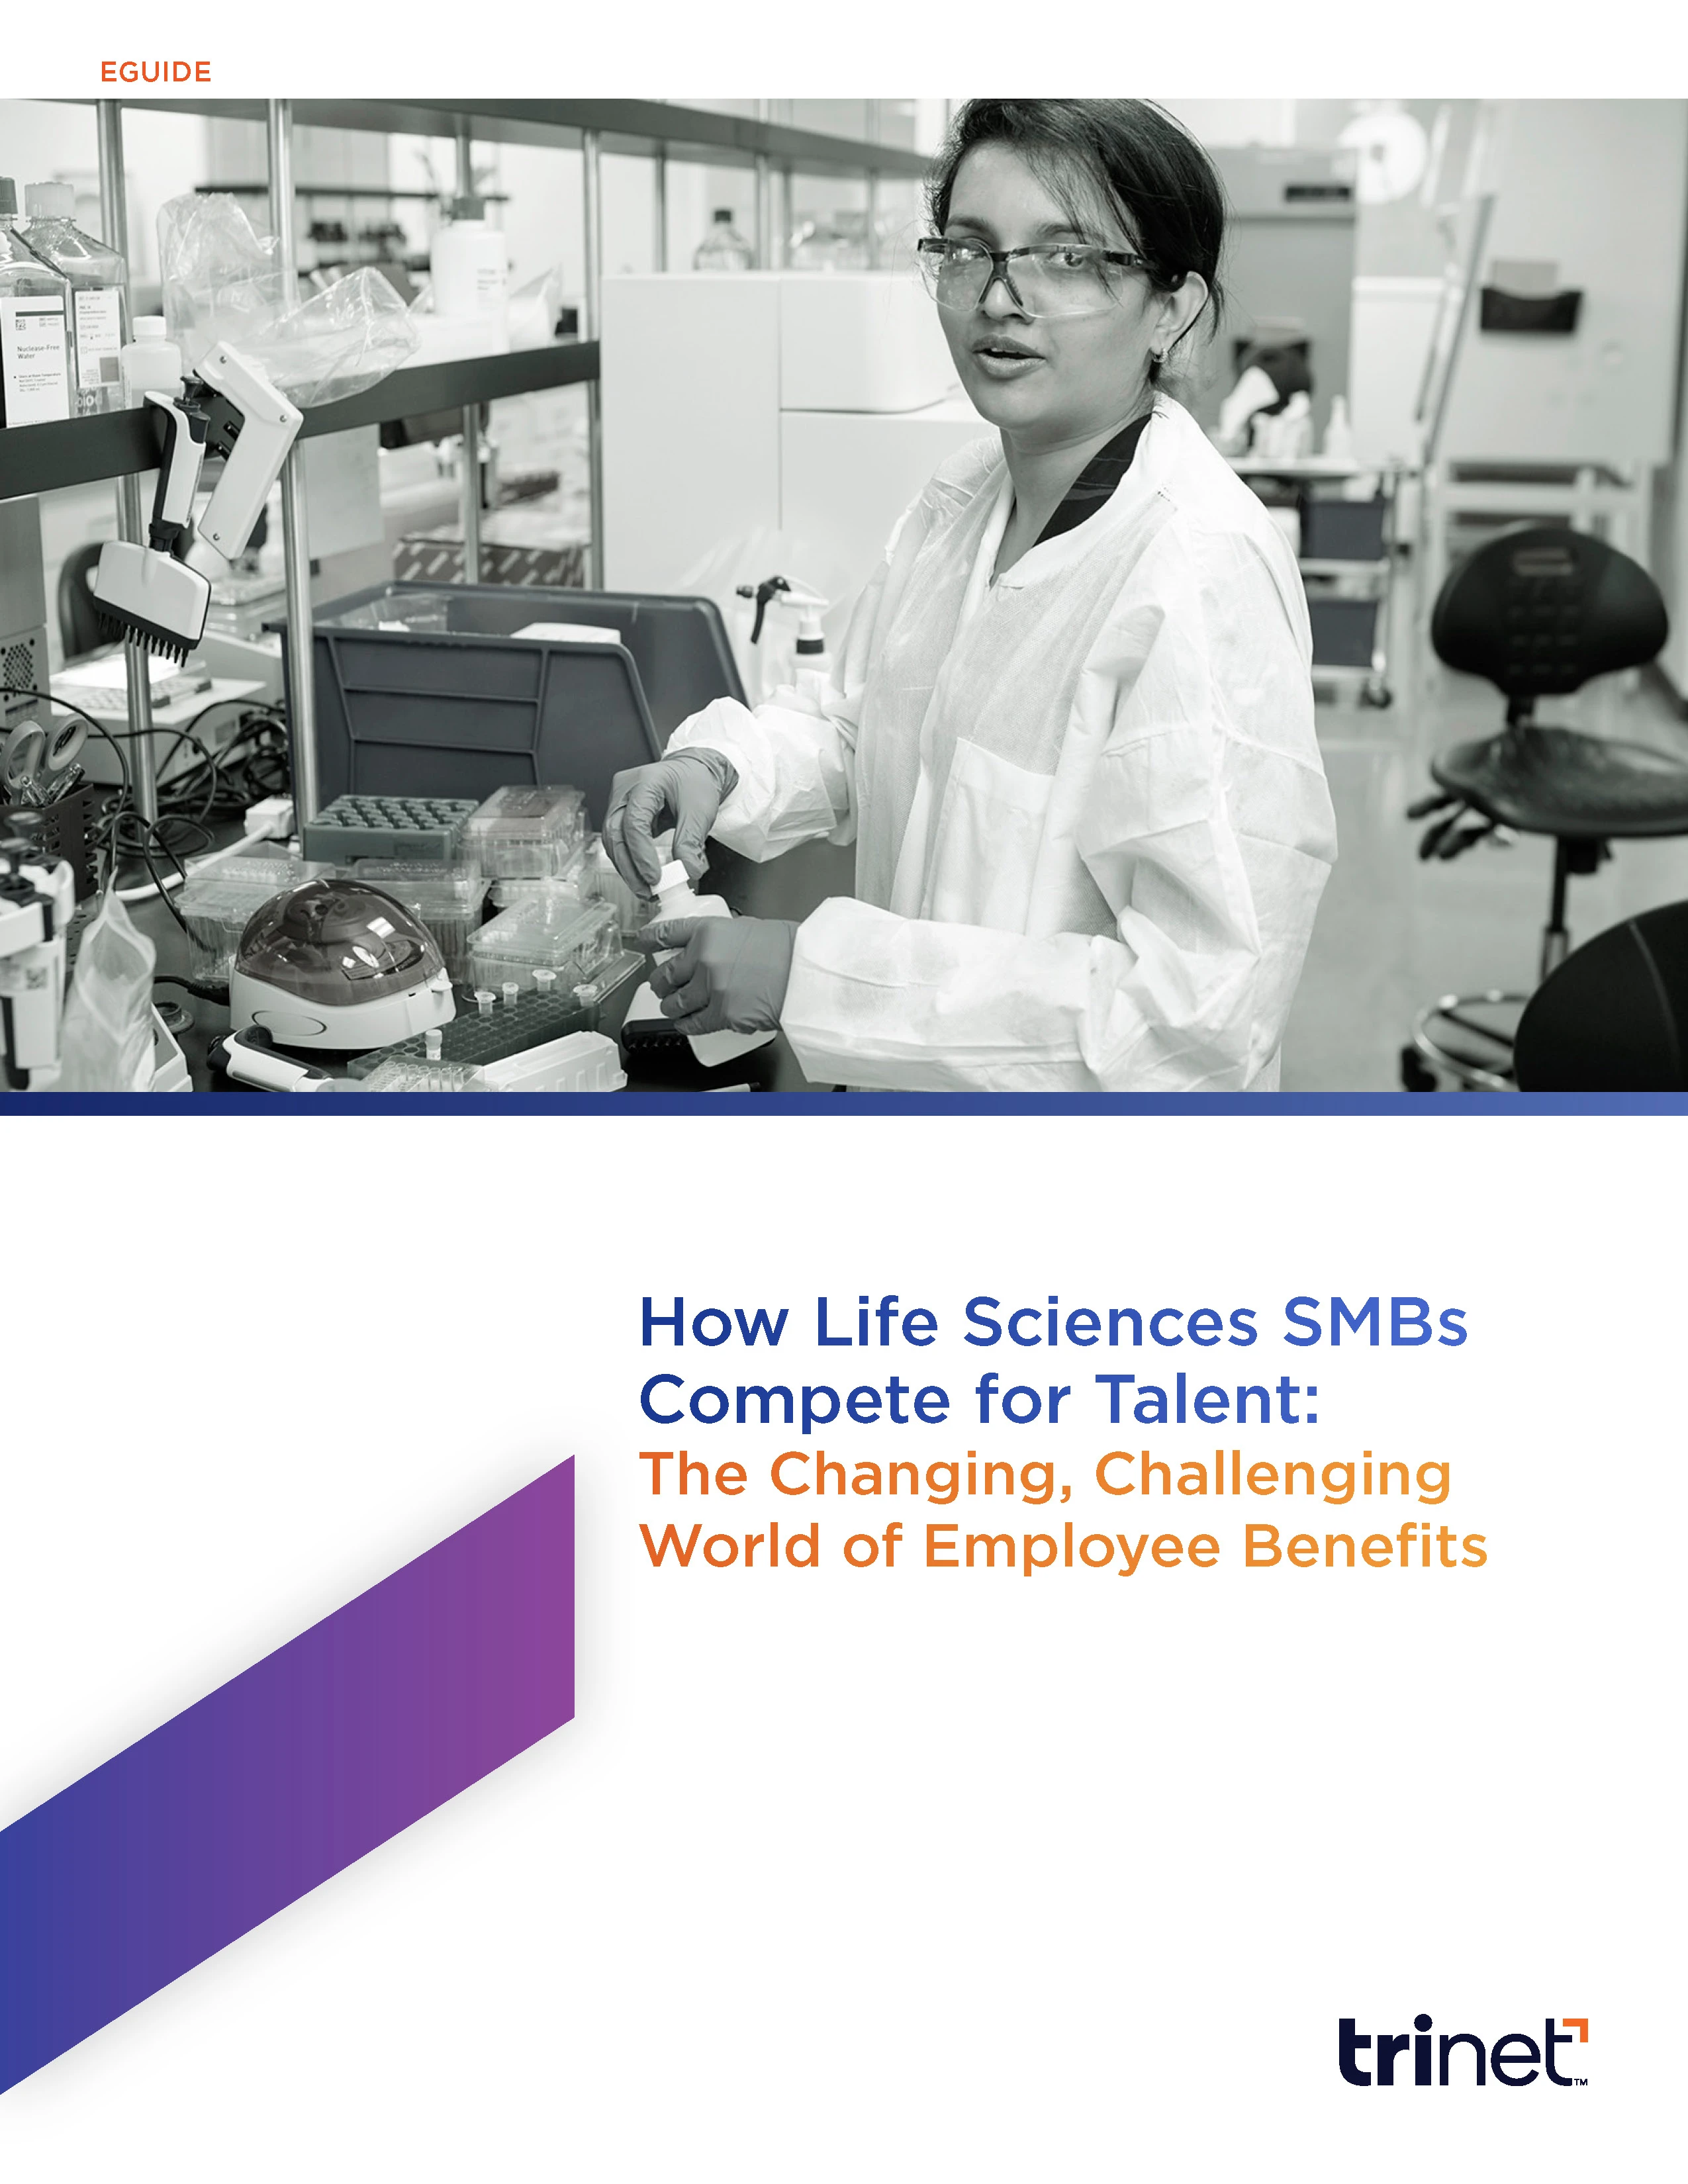 The Benefits of Benefits Life Sciences